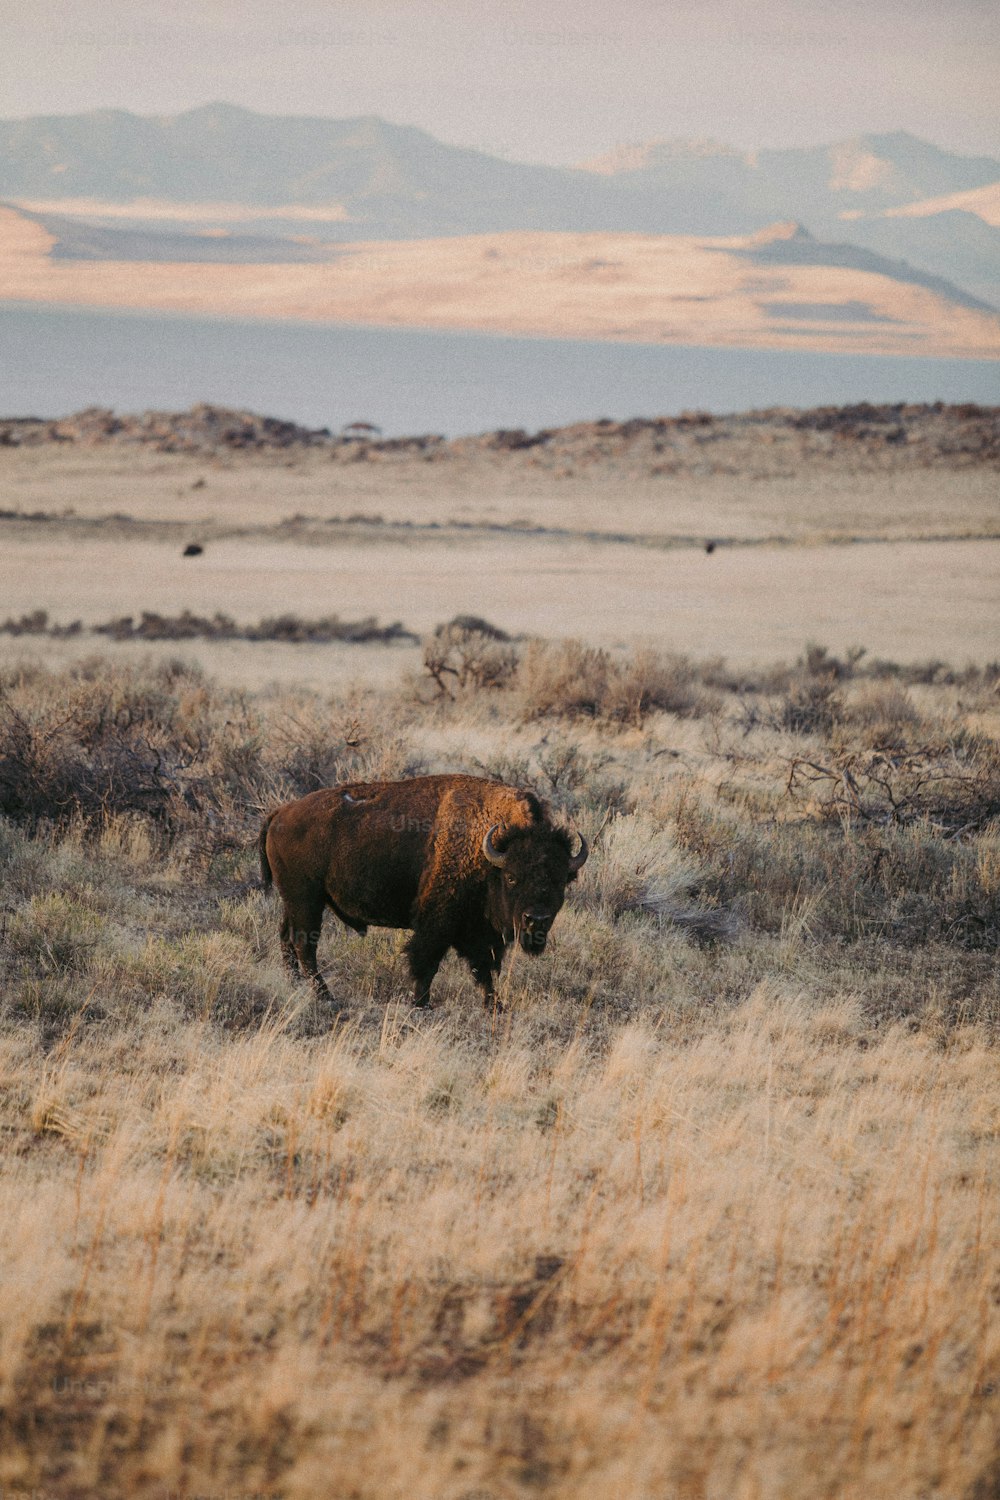 a bison is standing in a field with mountains in the background